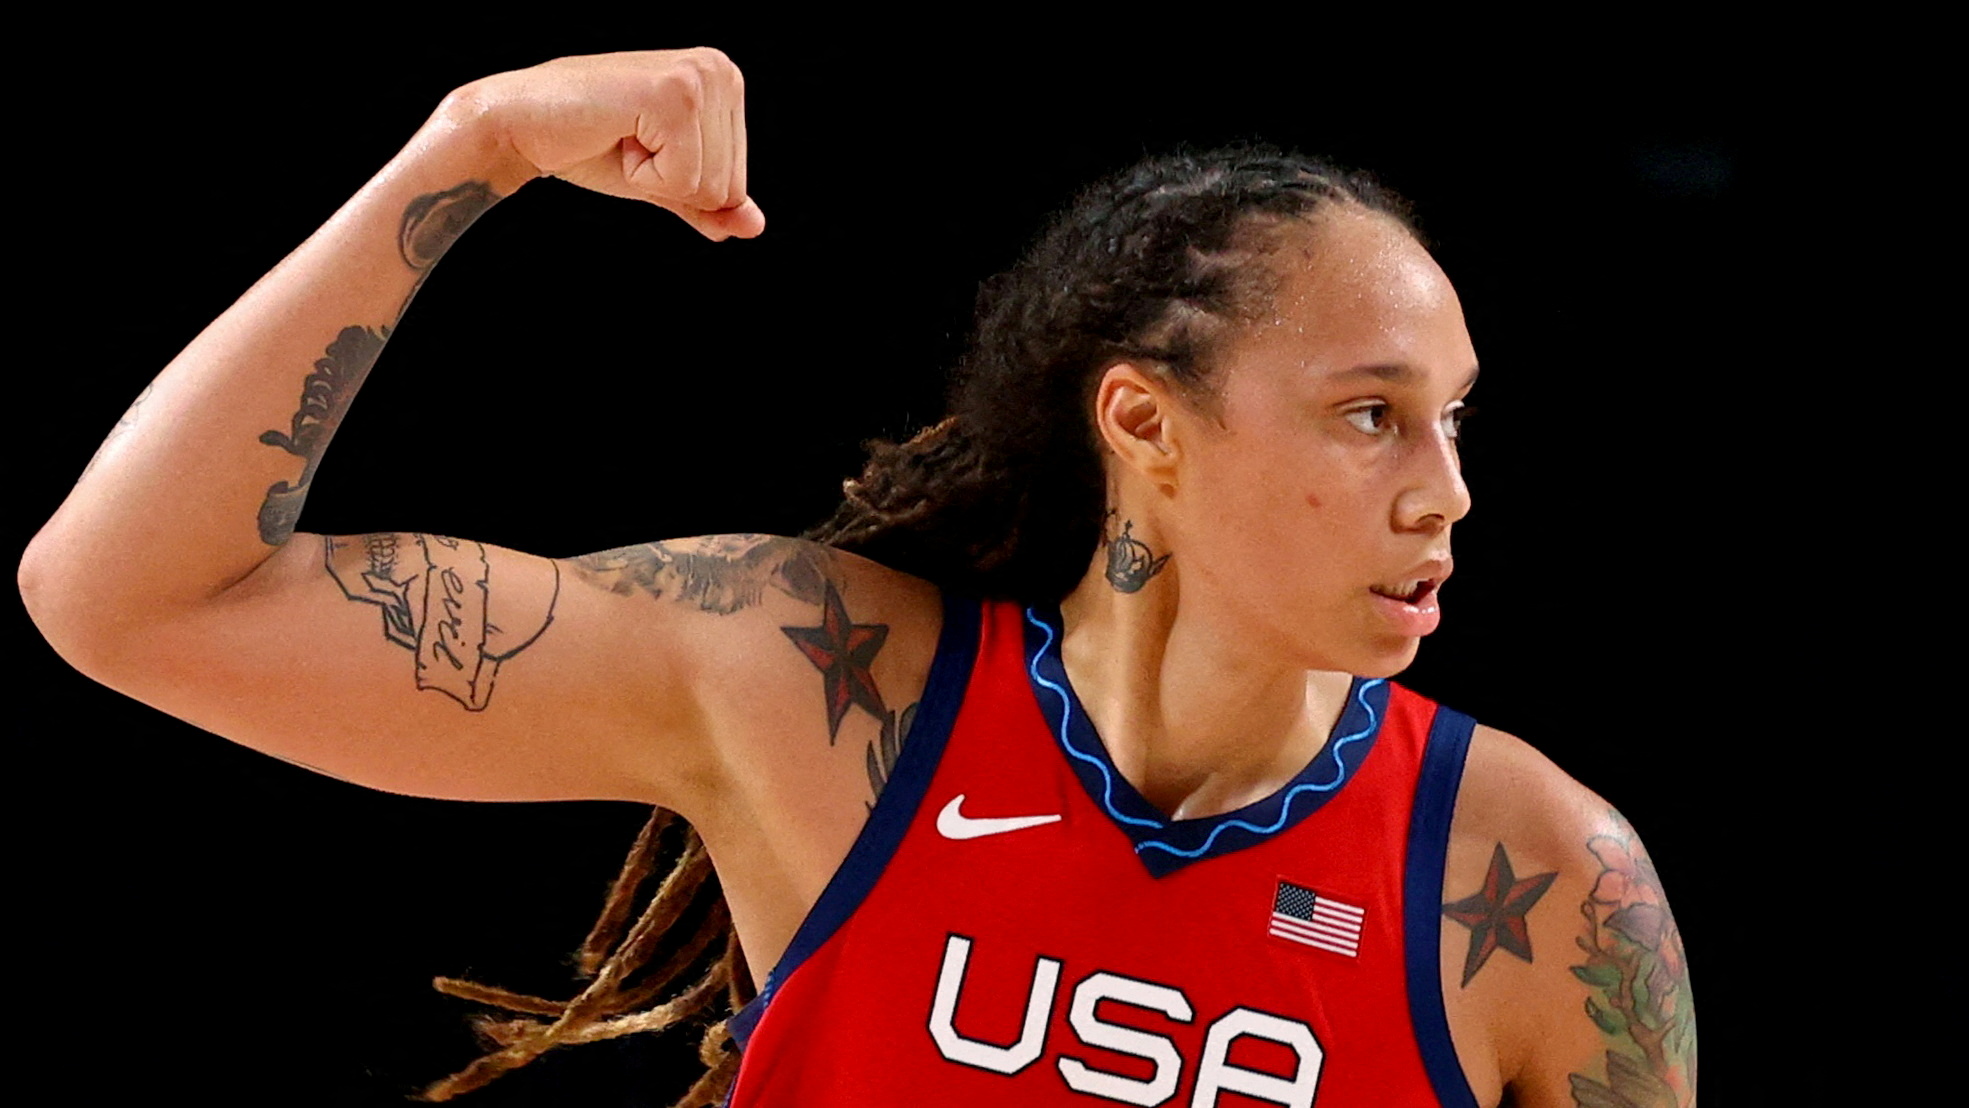 FILE PHOTO: Brittney Griner of the United States gestures during a match against Australia at Saitama Super Arena during the quarterfinals of the Tokyo 2020 Olympic women's basketball in Saitama, Japan August 4, 2021.